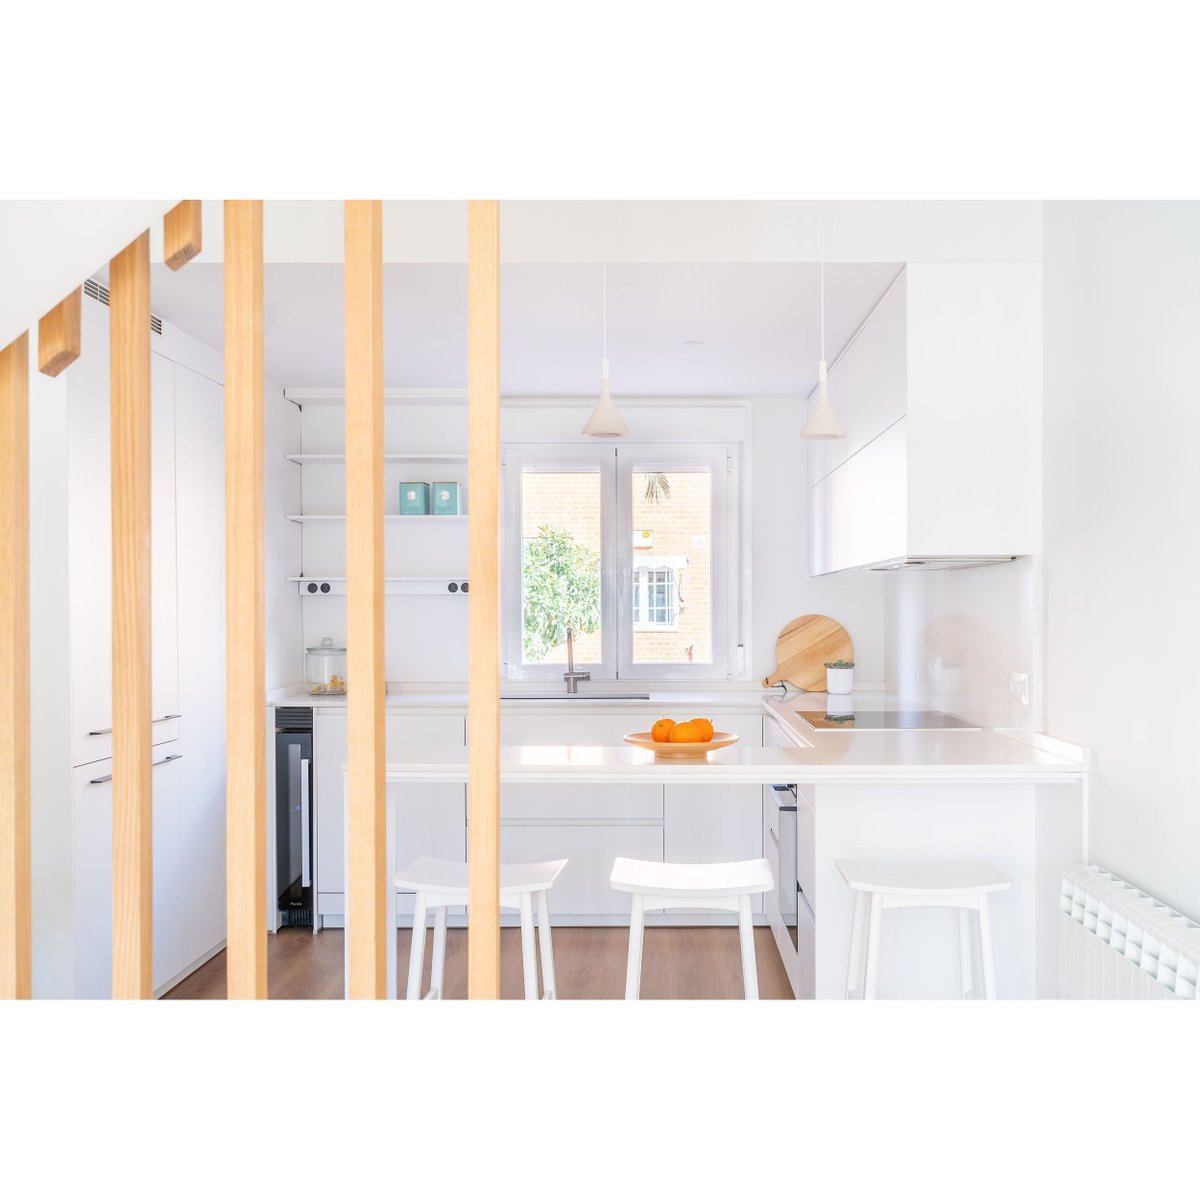 Casa MA • MA House
Discover the renovation of Casa MA in Tres Cantos, Madrid!
Designed by @masu_es and captured by Enqui Photos. This beautiful minimalist kitchen with peninsula optimizes space and lighting perfectly. #InteriorInspiration #KitchenRenovation #KitchenDesign